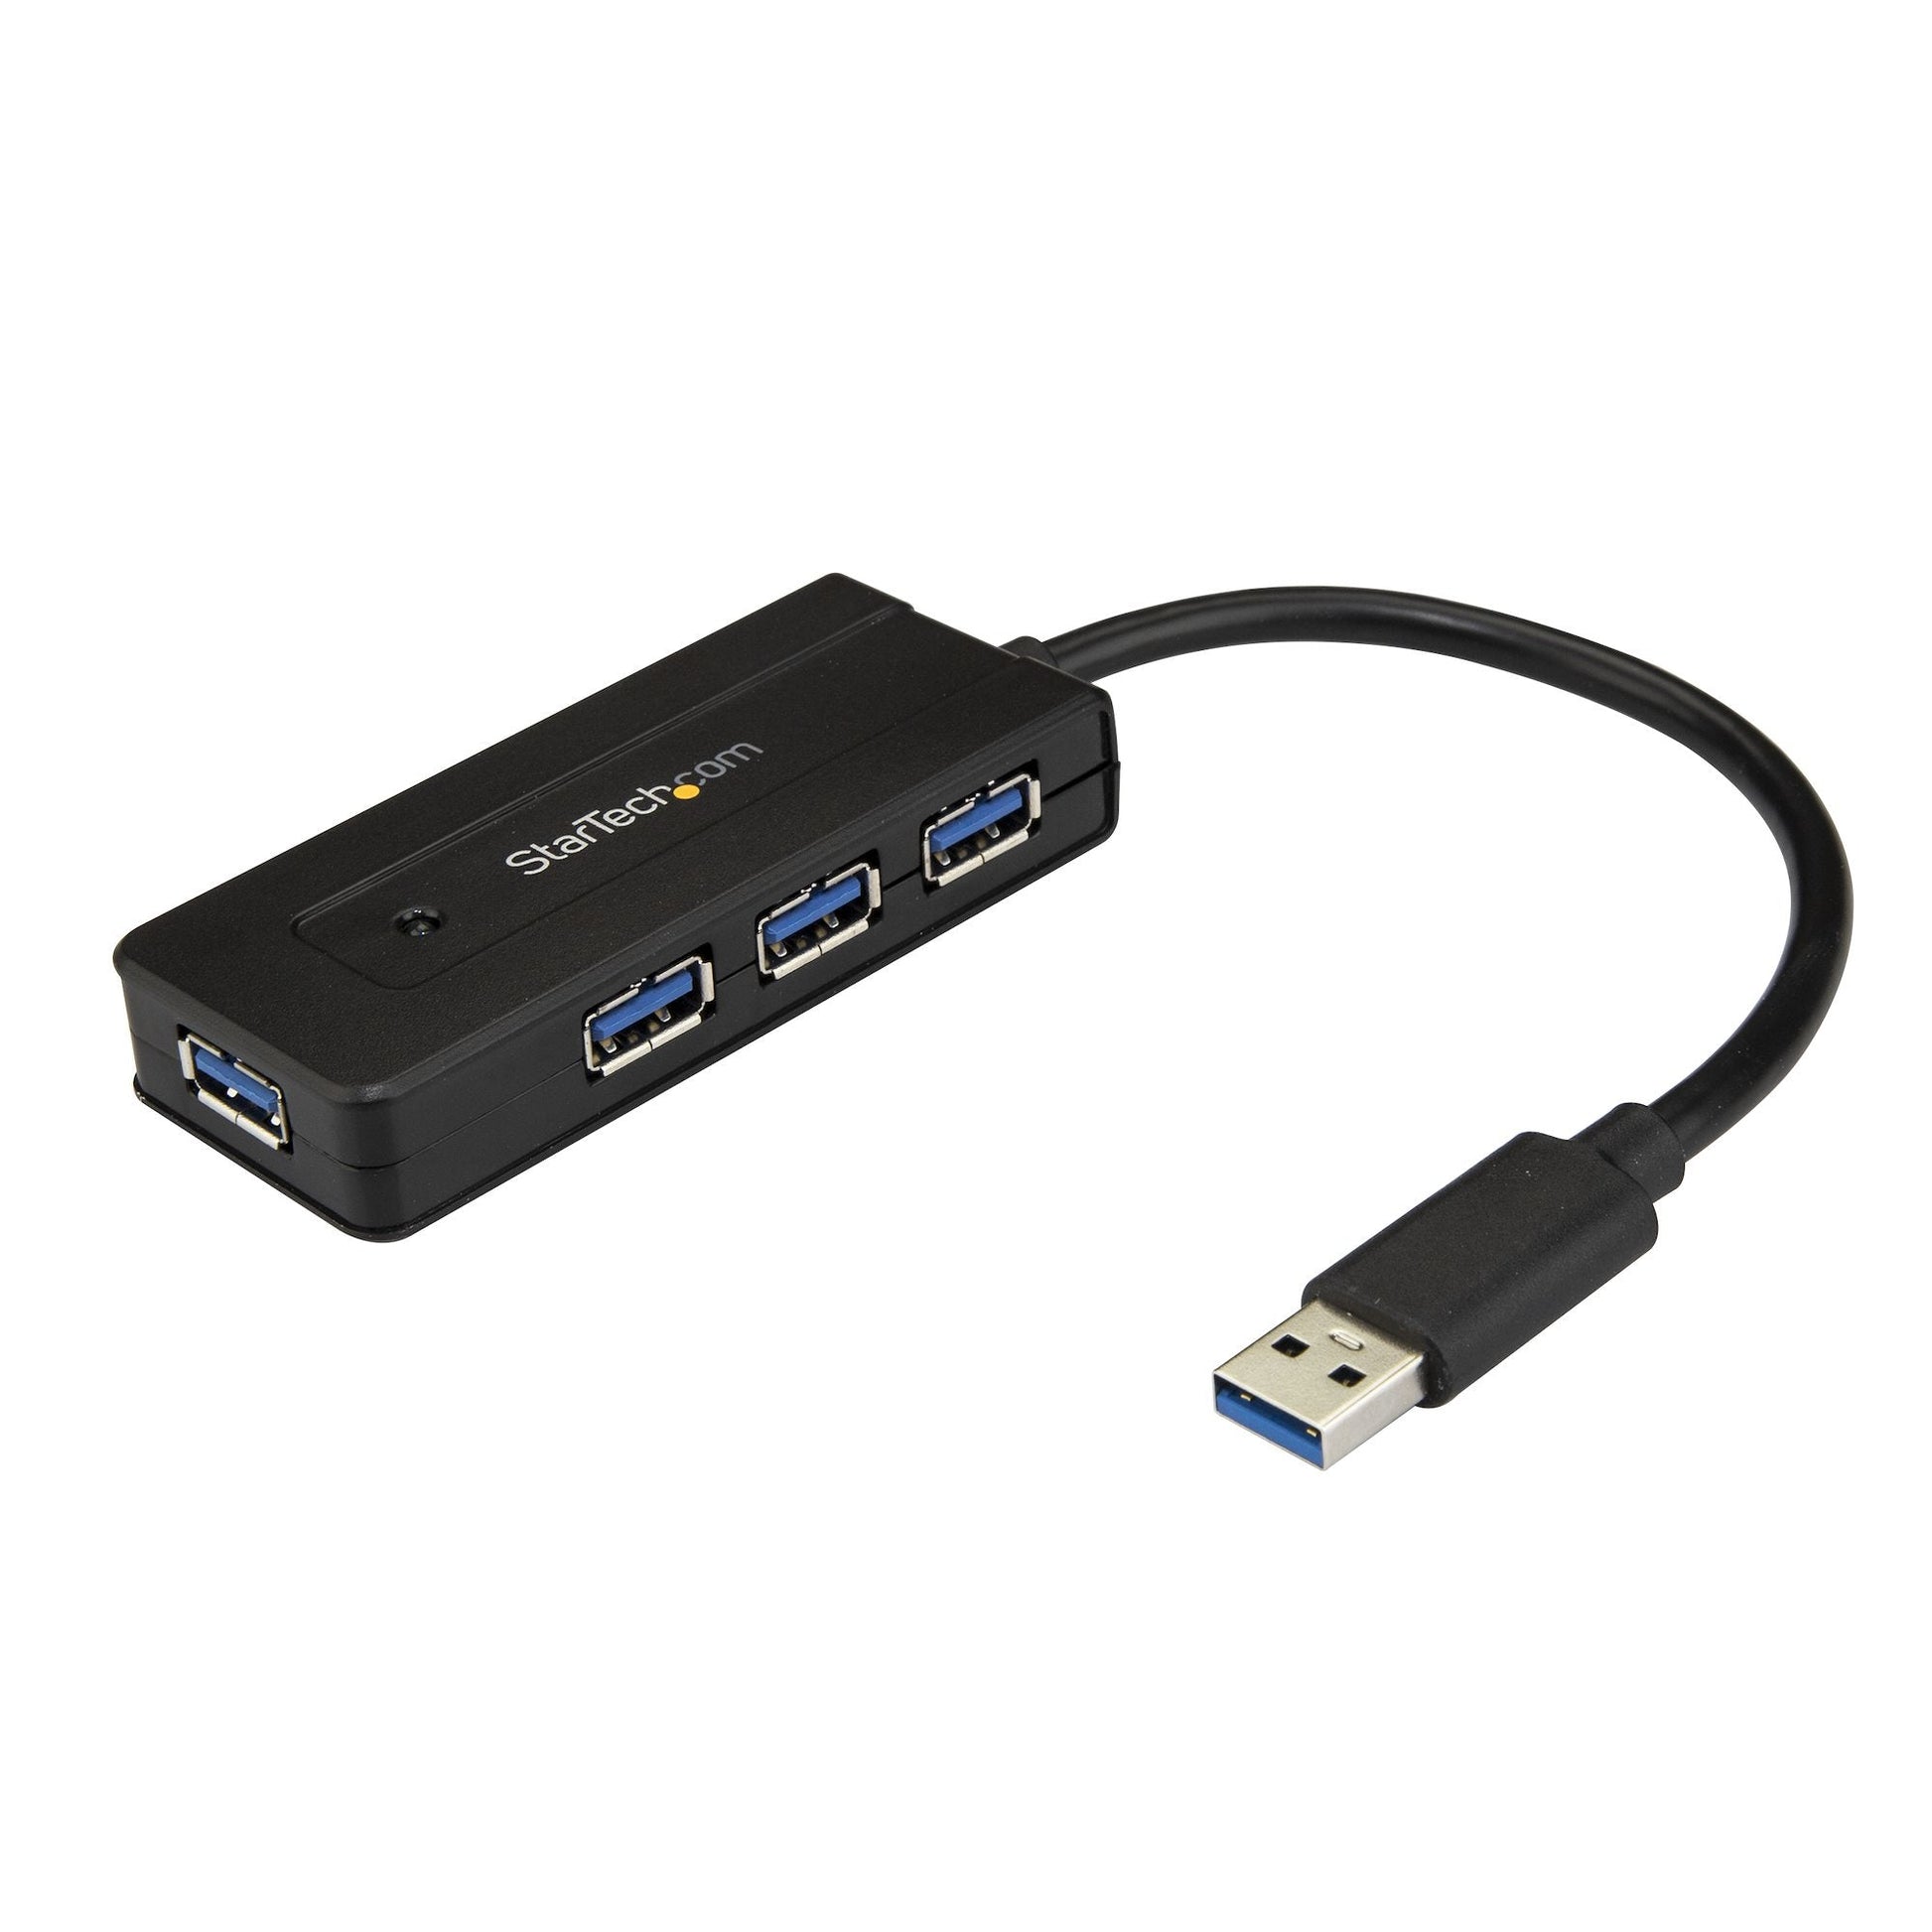 Startech.Com 4 Port Usb 3.0 Hub (Superspeed 5Gbps) With Fast Charge – Portable Usb 3.1 Gen 1